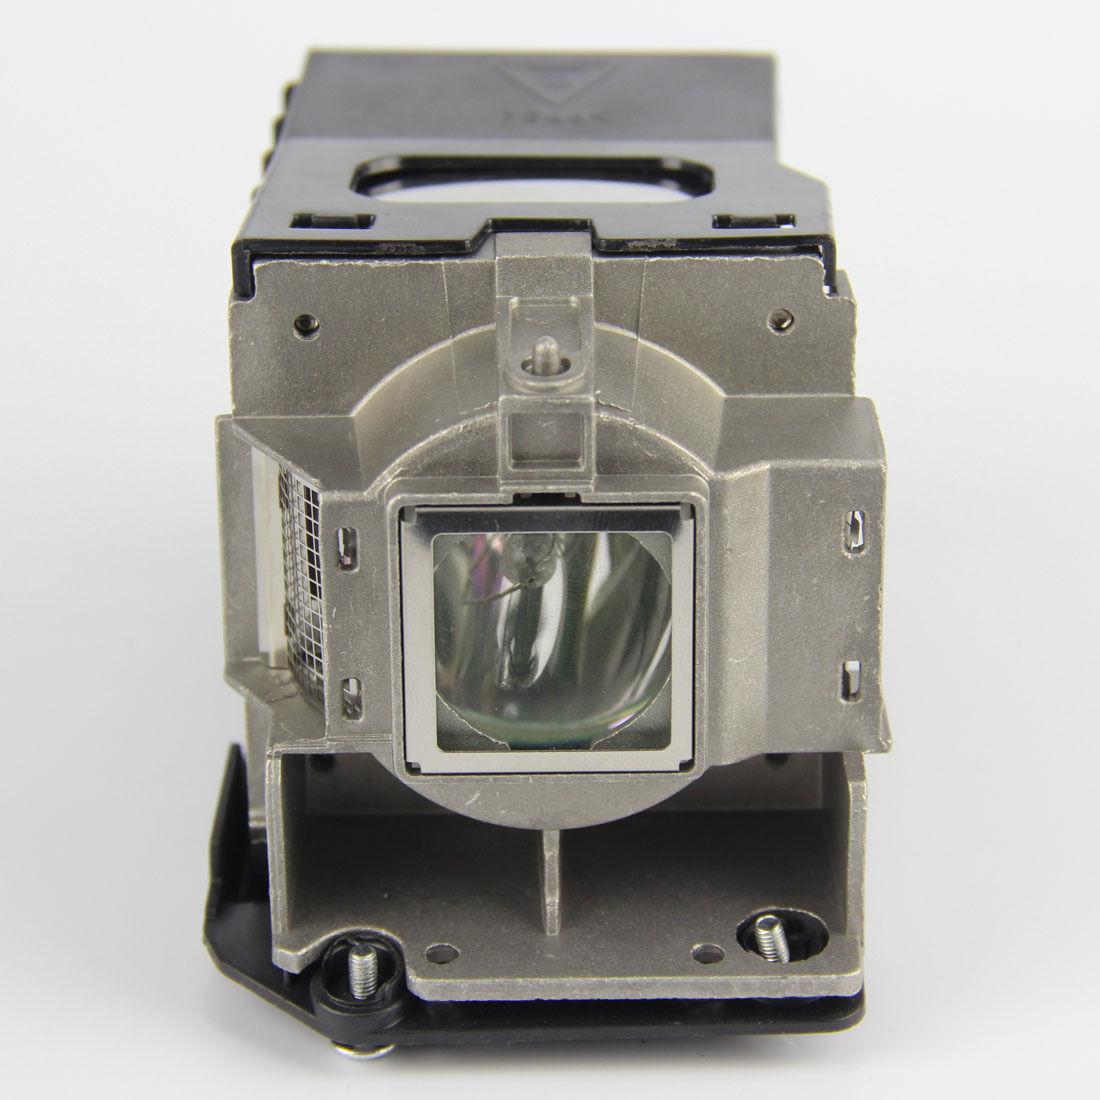 TLPLW15 Lamp for TOSHIBA TDP ST20 - Picture 1 of 1